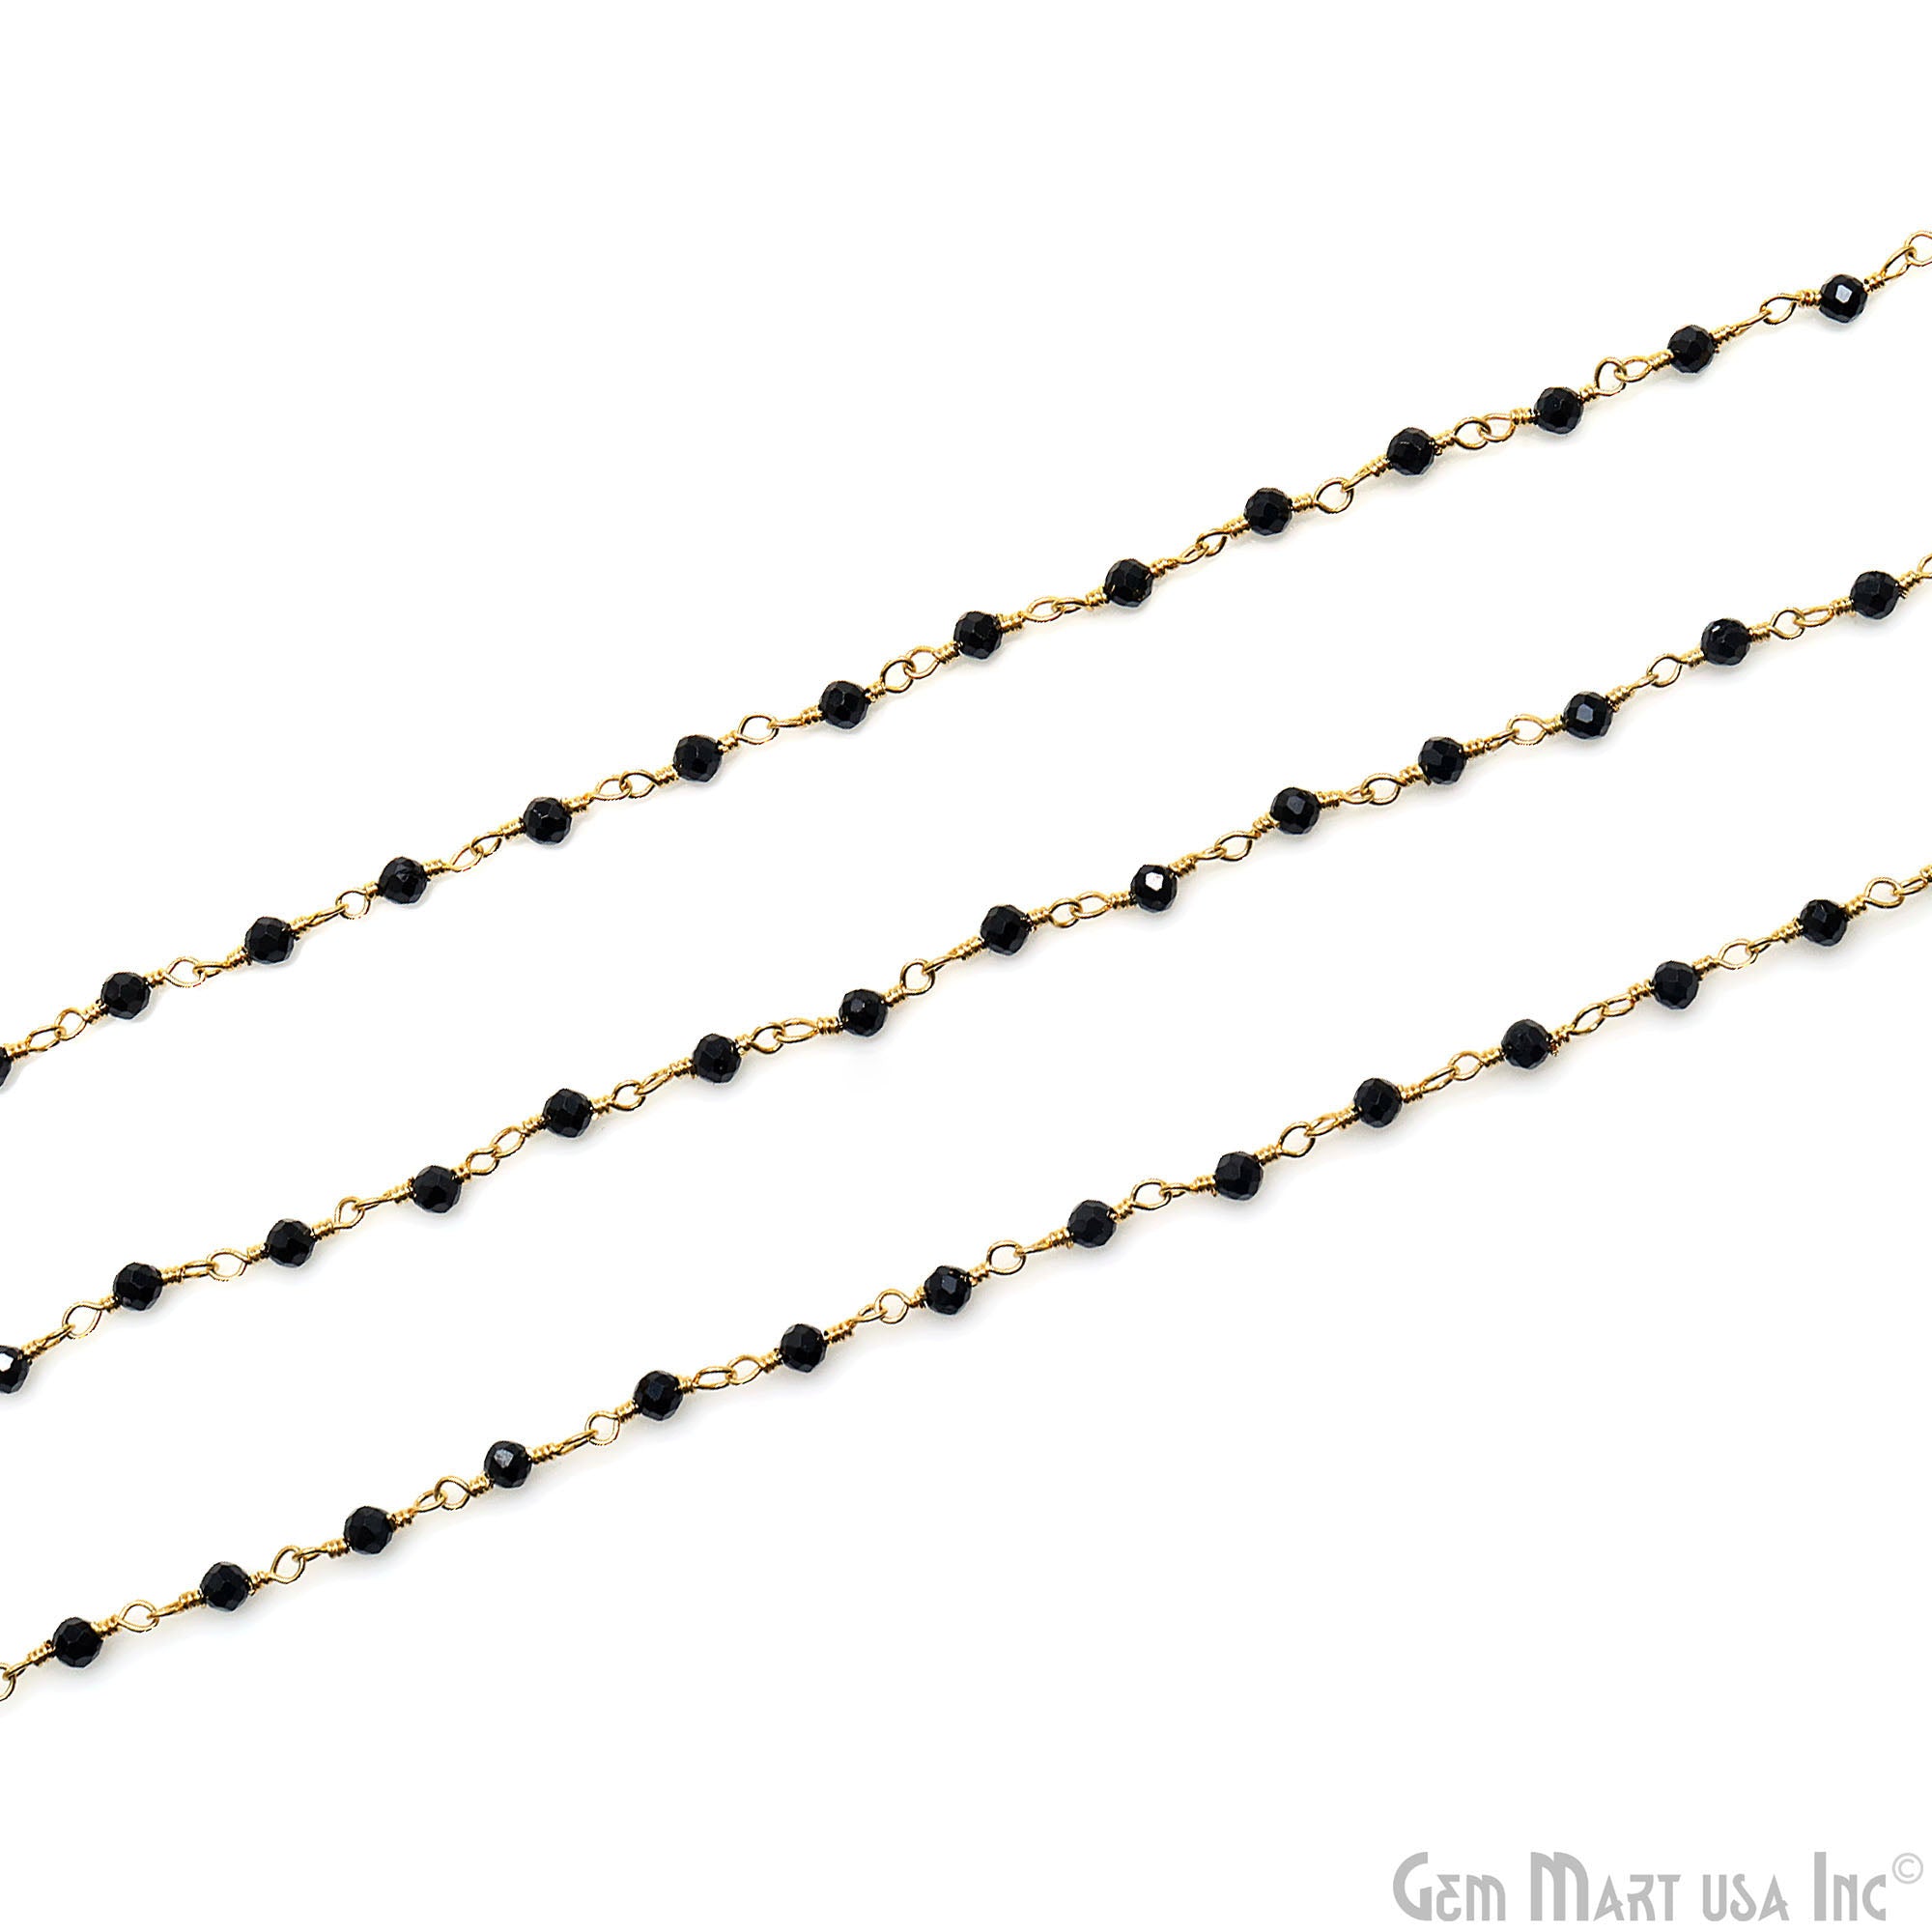 Black Spinel Smooth 2-2.5mm Gold Plated Wire Wrapped Gemstone Beads Rosary Chain (762919911471)